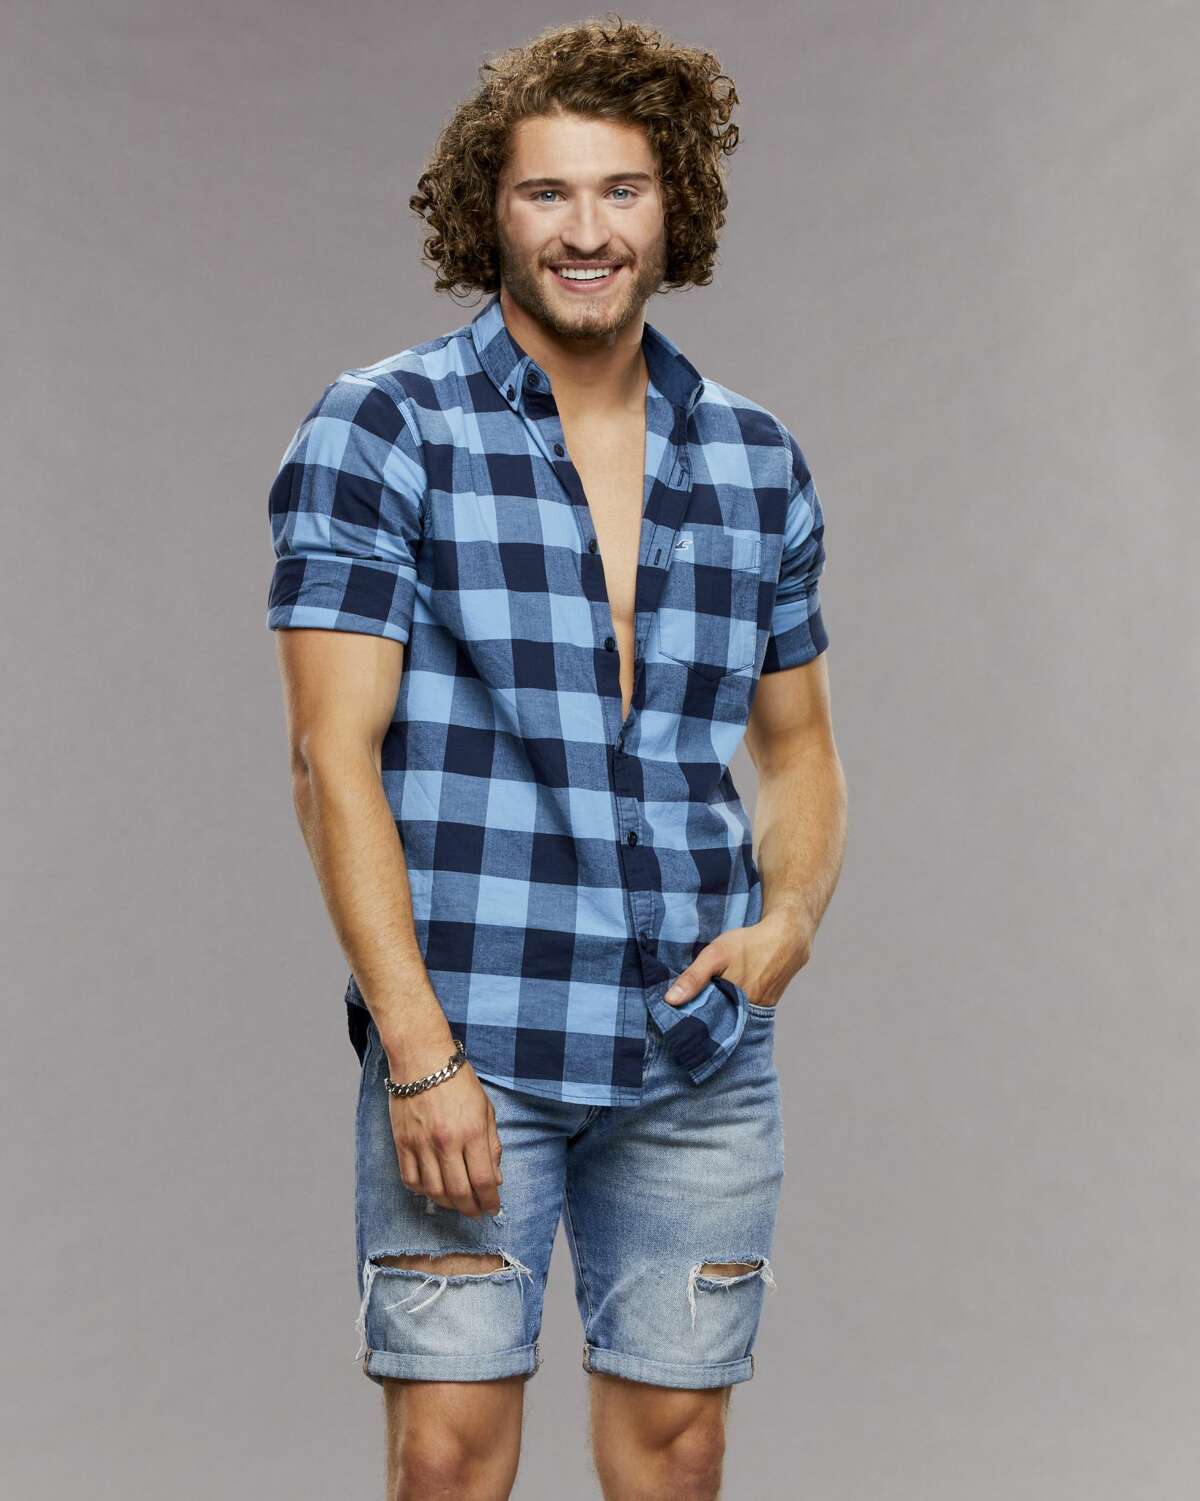 Christian Birkenberger will be part of the new Big Brother season premiering on July 7 on the CBS Television Network. 